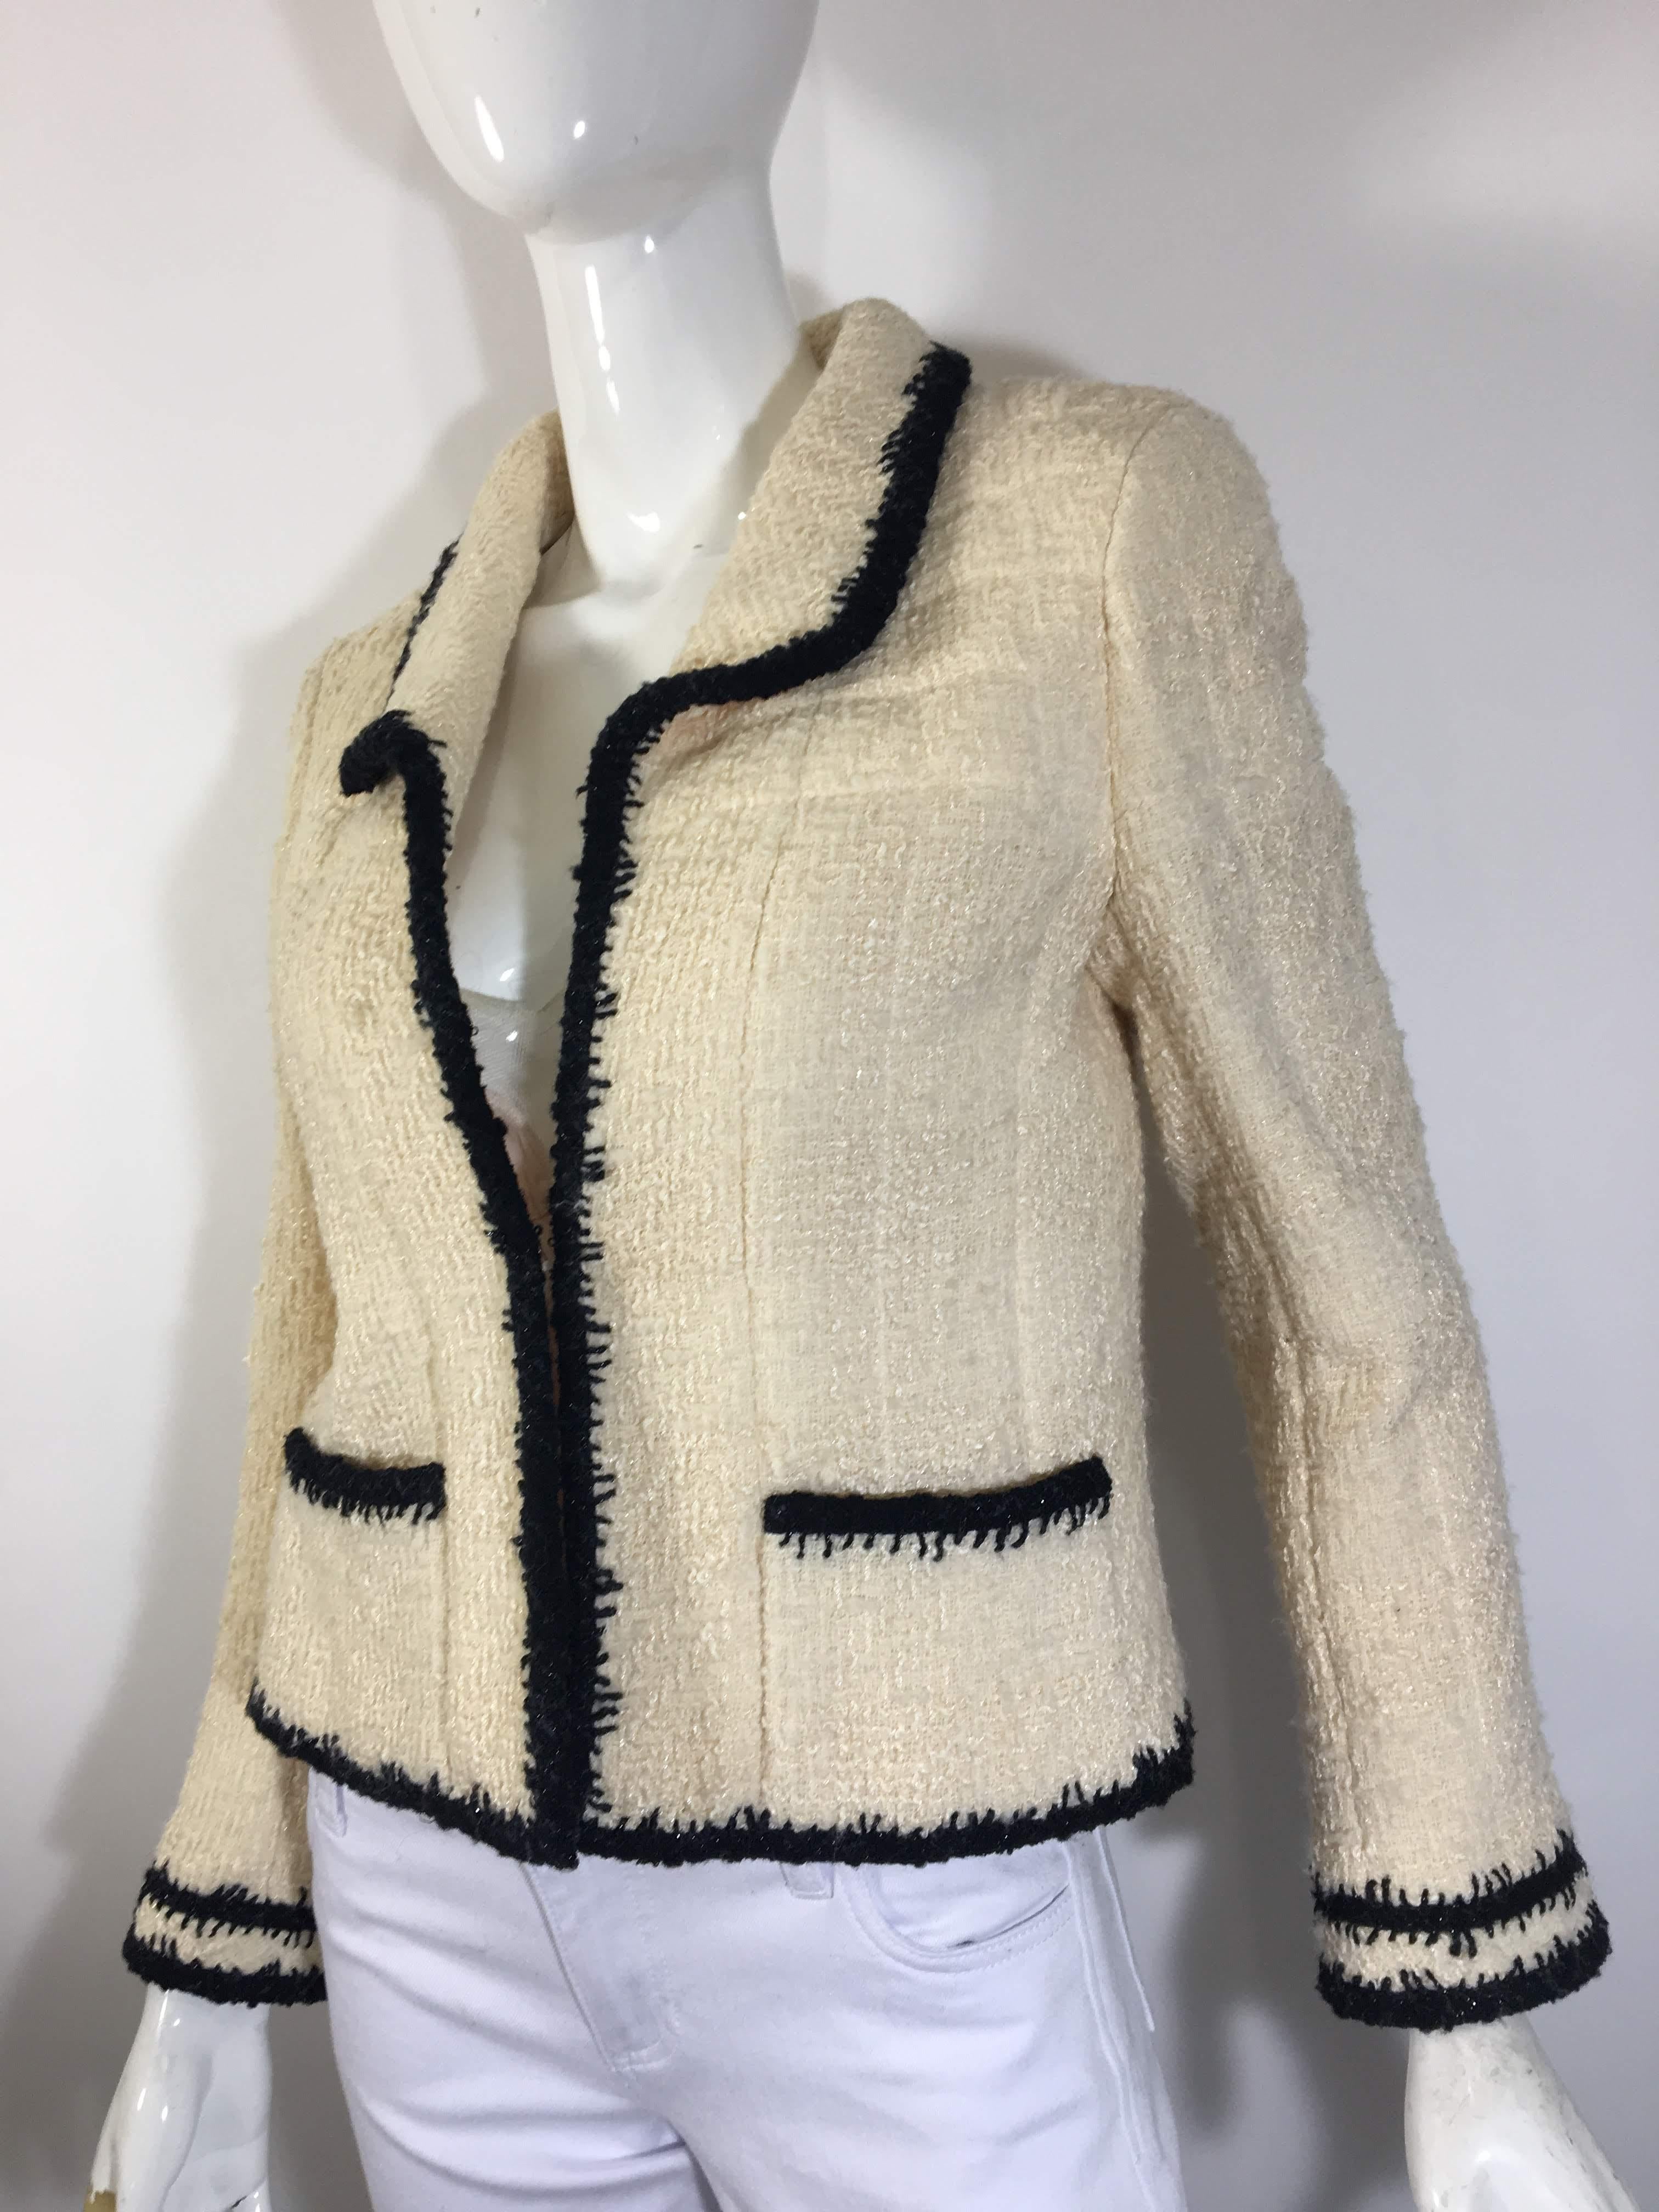 Chanel Cream Textured Wool/Silk Jacket 
Collar with Deep V-Front and Two Front Pockets
Black Trim - Double Striped on Sleeves
Embellished Buttons with Jewels and Chanel Logo.
Silk Lining
Made in France- Size 40